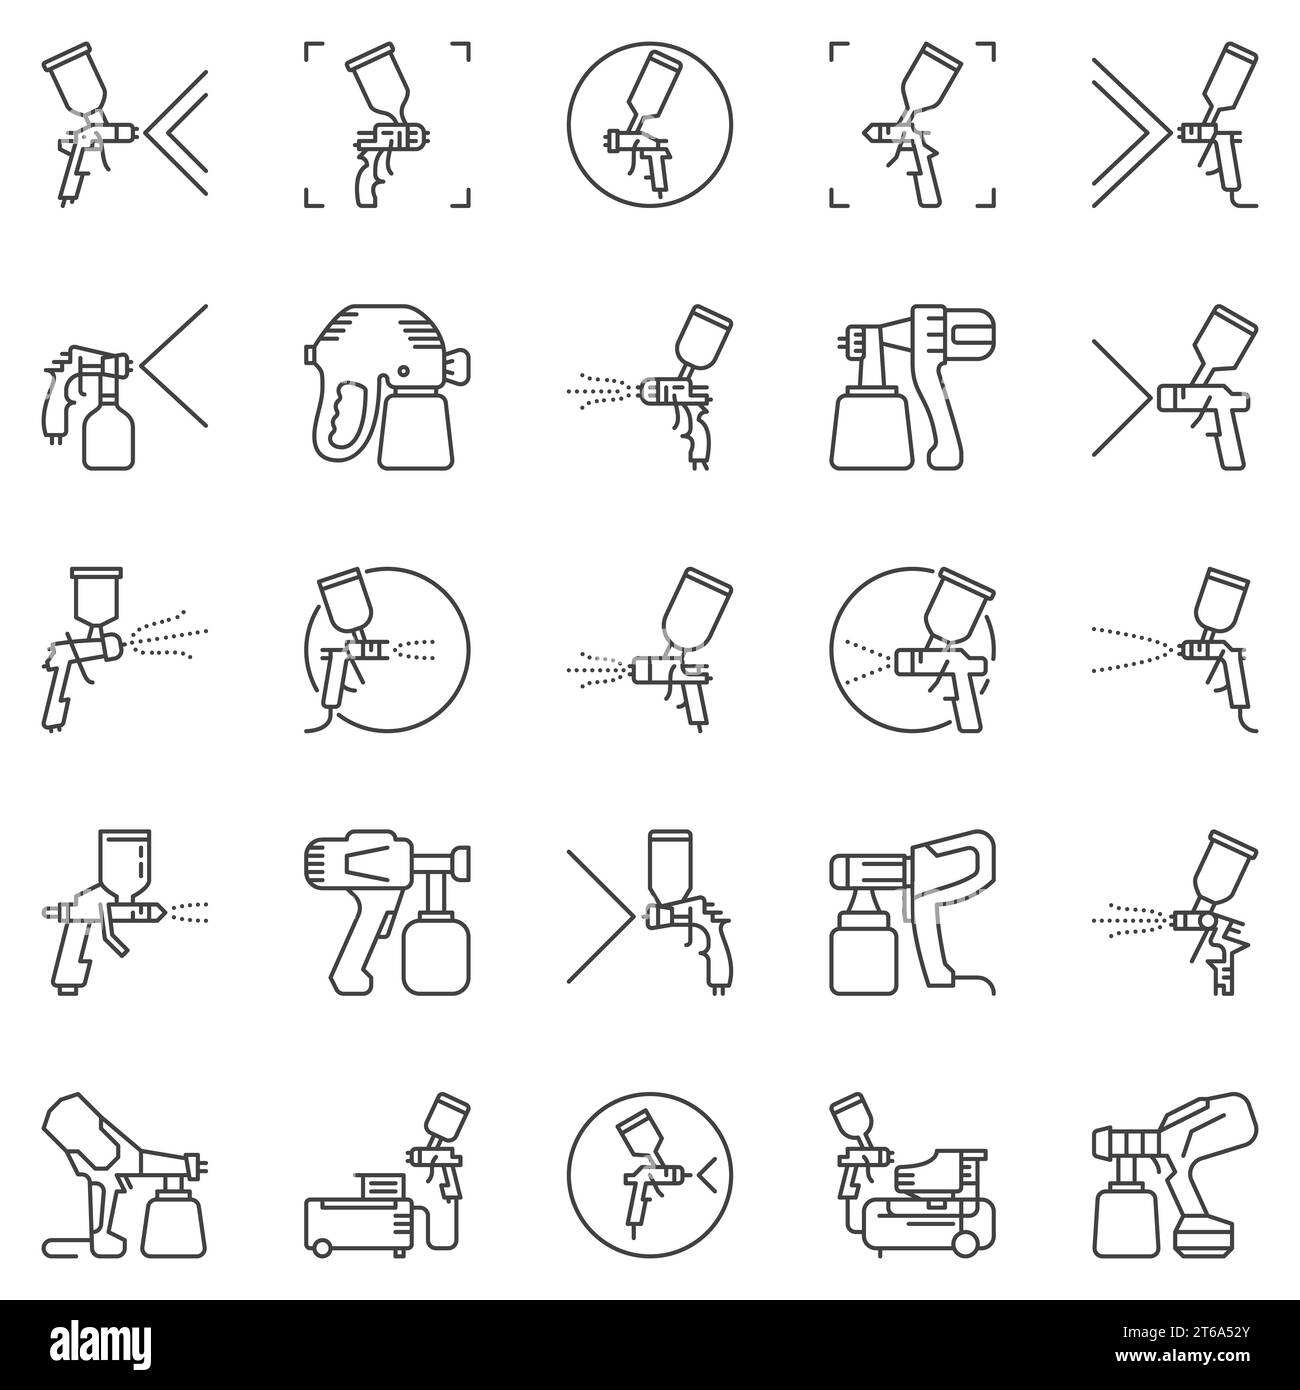 Spray Gun and Paint Sprayer outline vector concept icons set. Handheld Paint Sprayers linear signs Stock Vector